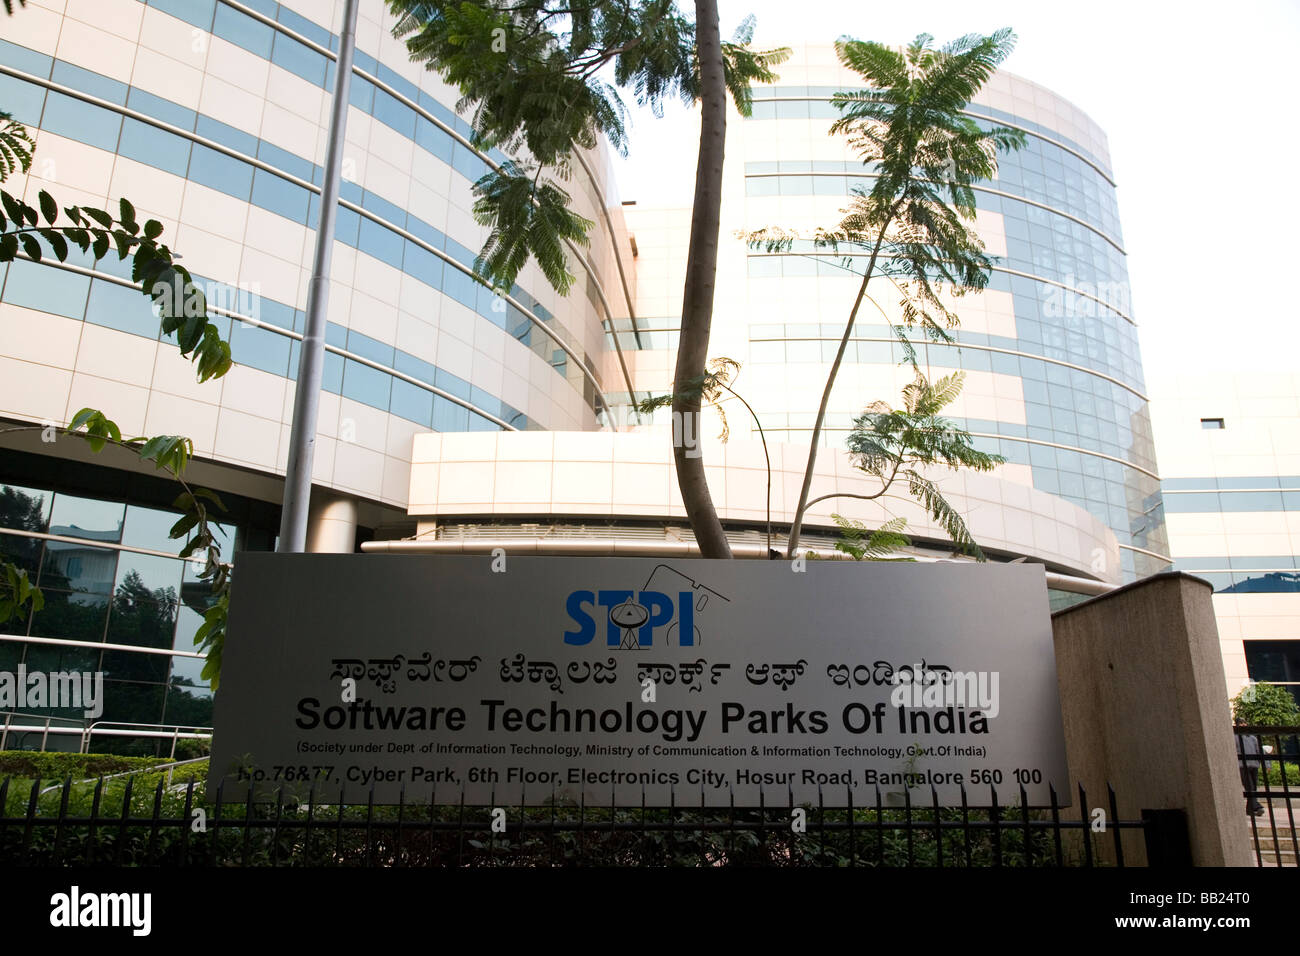 A sign for the Software Technology Parks of India (STPI) within Electronics City, a suburb of Bangalore, India. Stock Photo